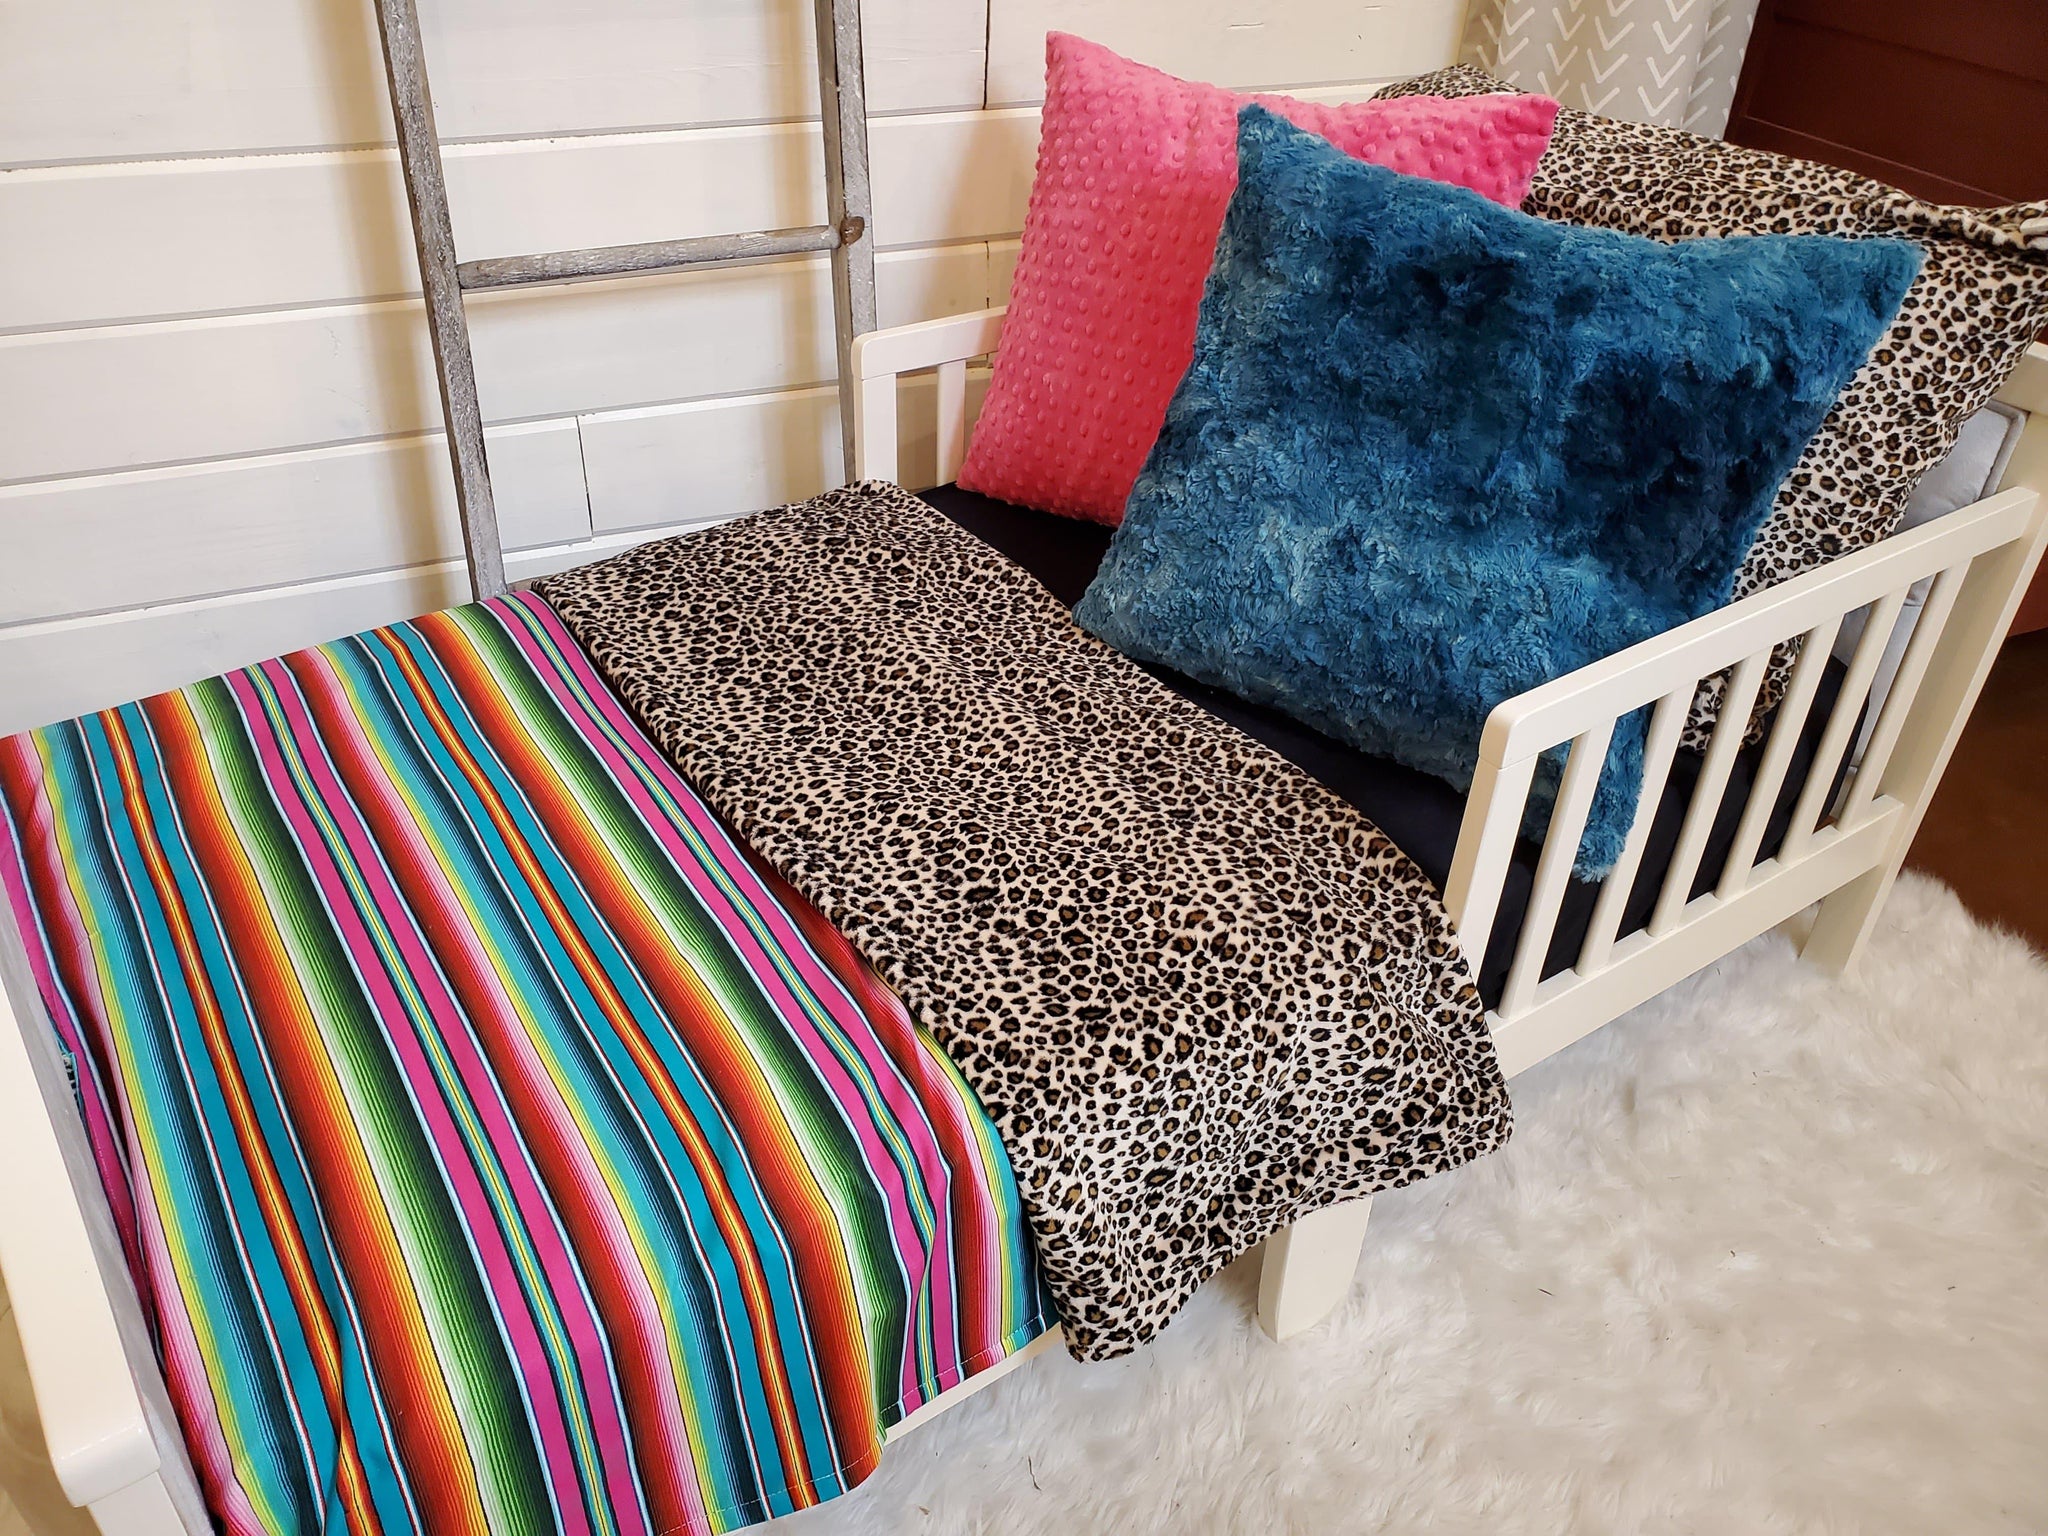 Toddler or Twin Bedding - Serape and Cheetah Minky Collection